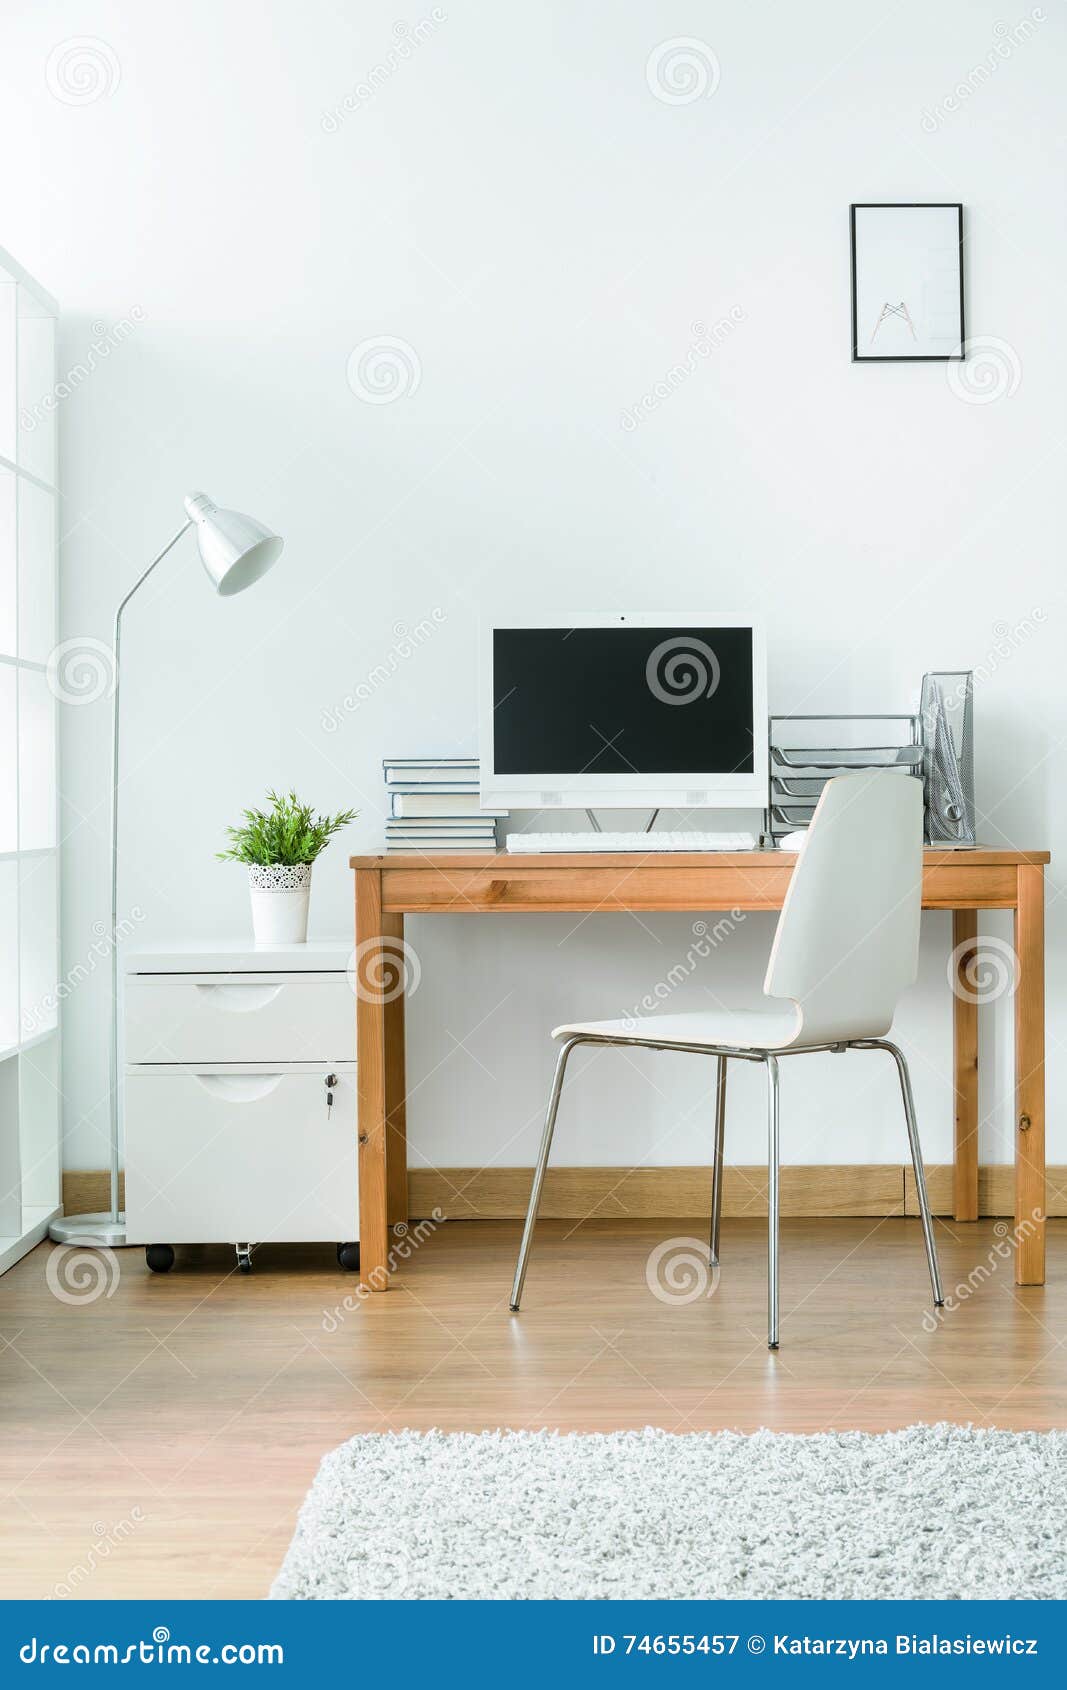 Practical And Nice Place To Work At Home Stock Image Image Of